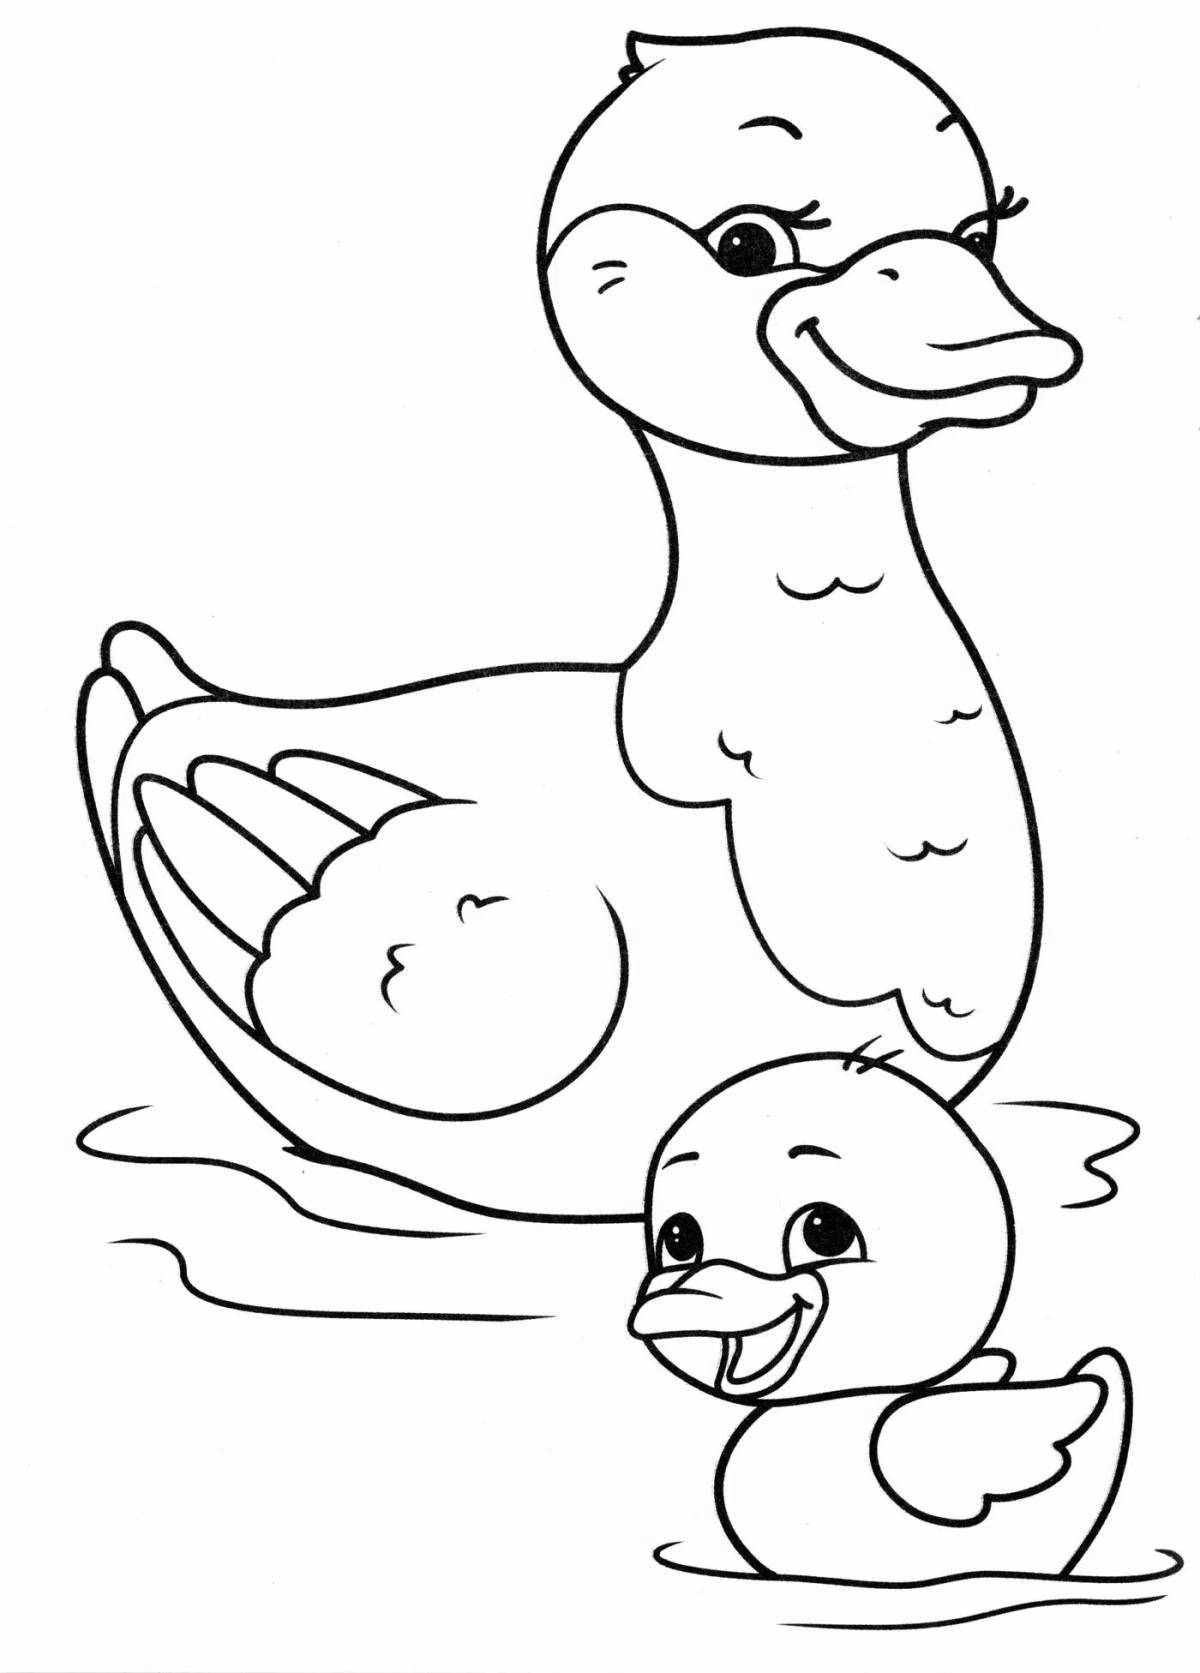 Playful duck coloring book for 3-4 year olds